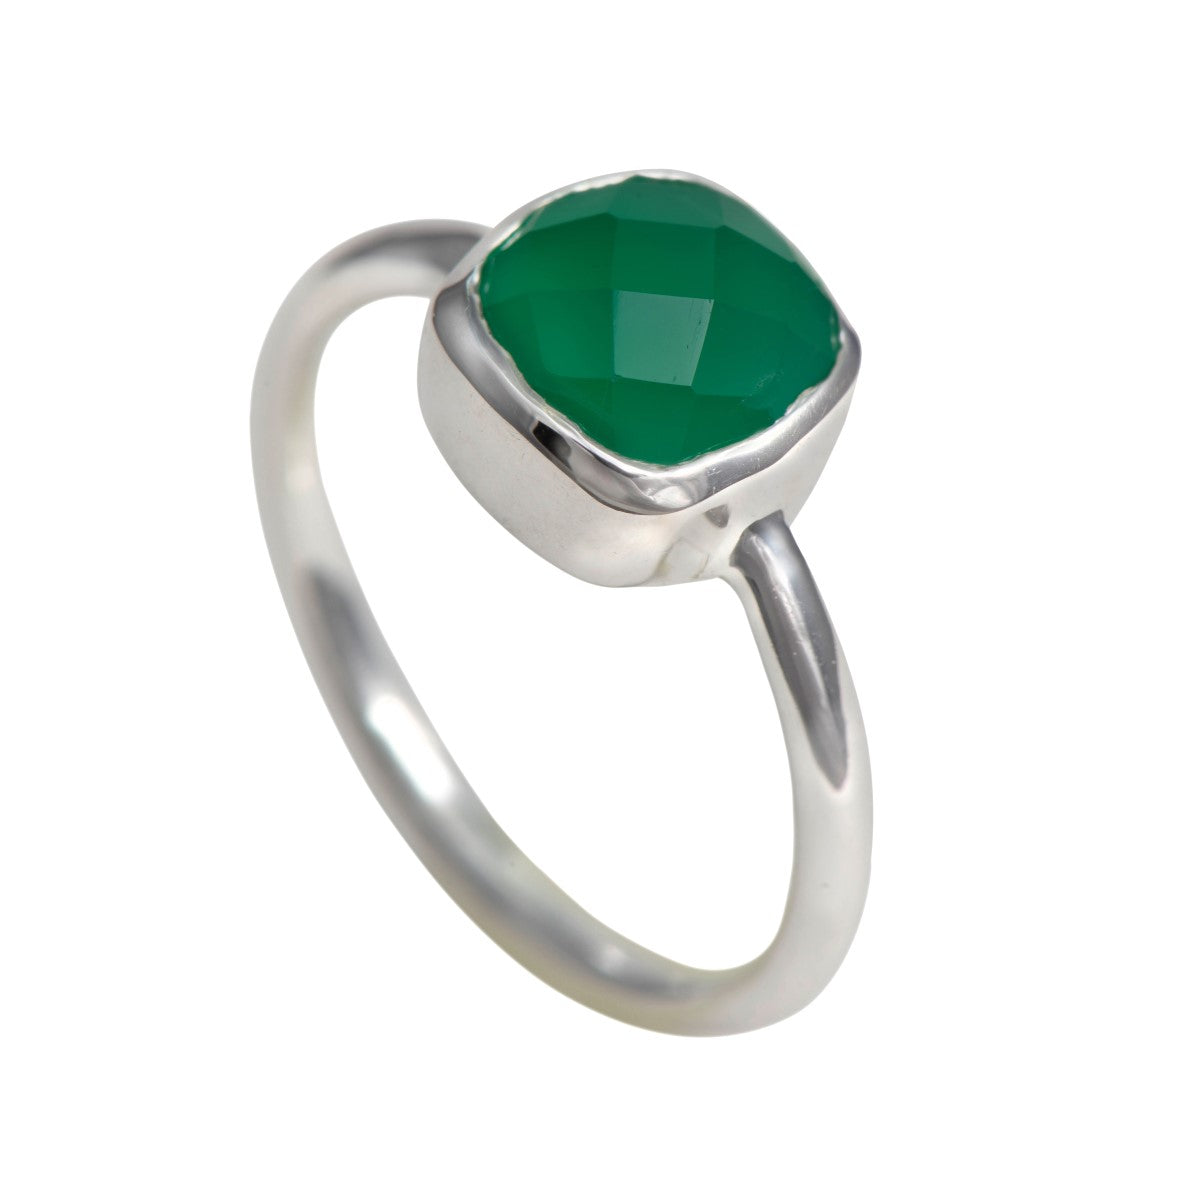 Faceted Square Cut Natural Gemstone Sterling Silver Solitaire Ring - Green Onyx